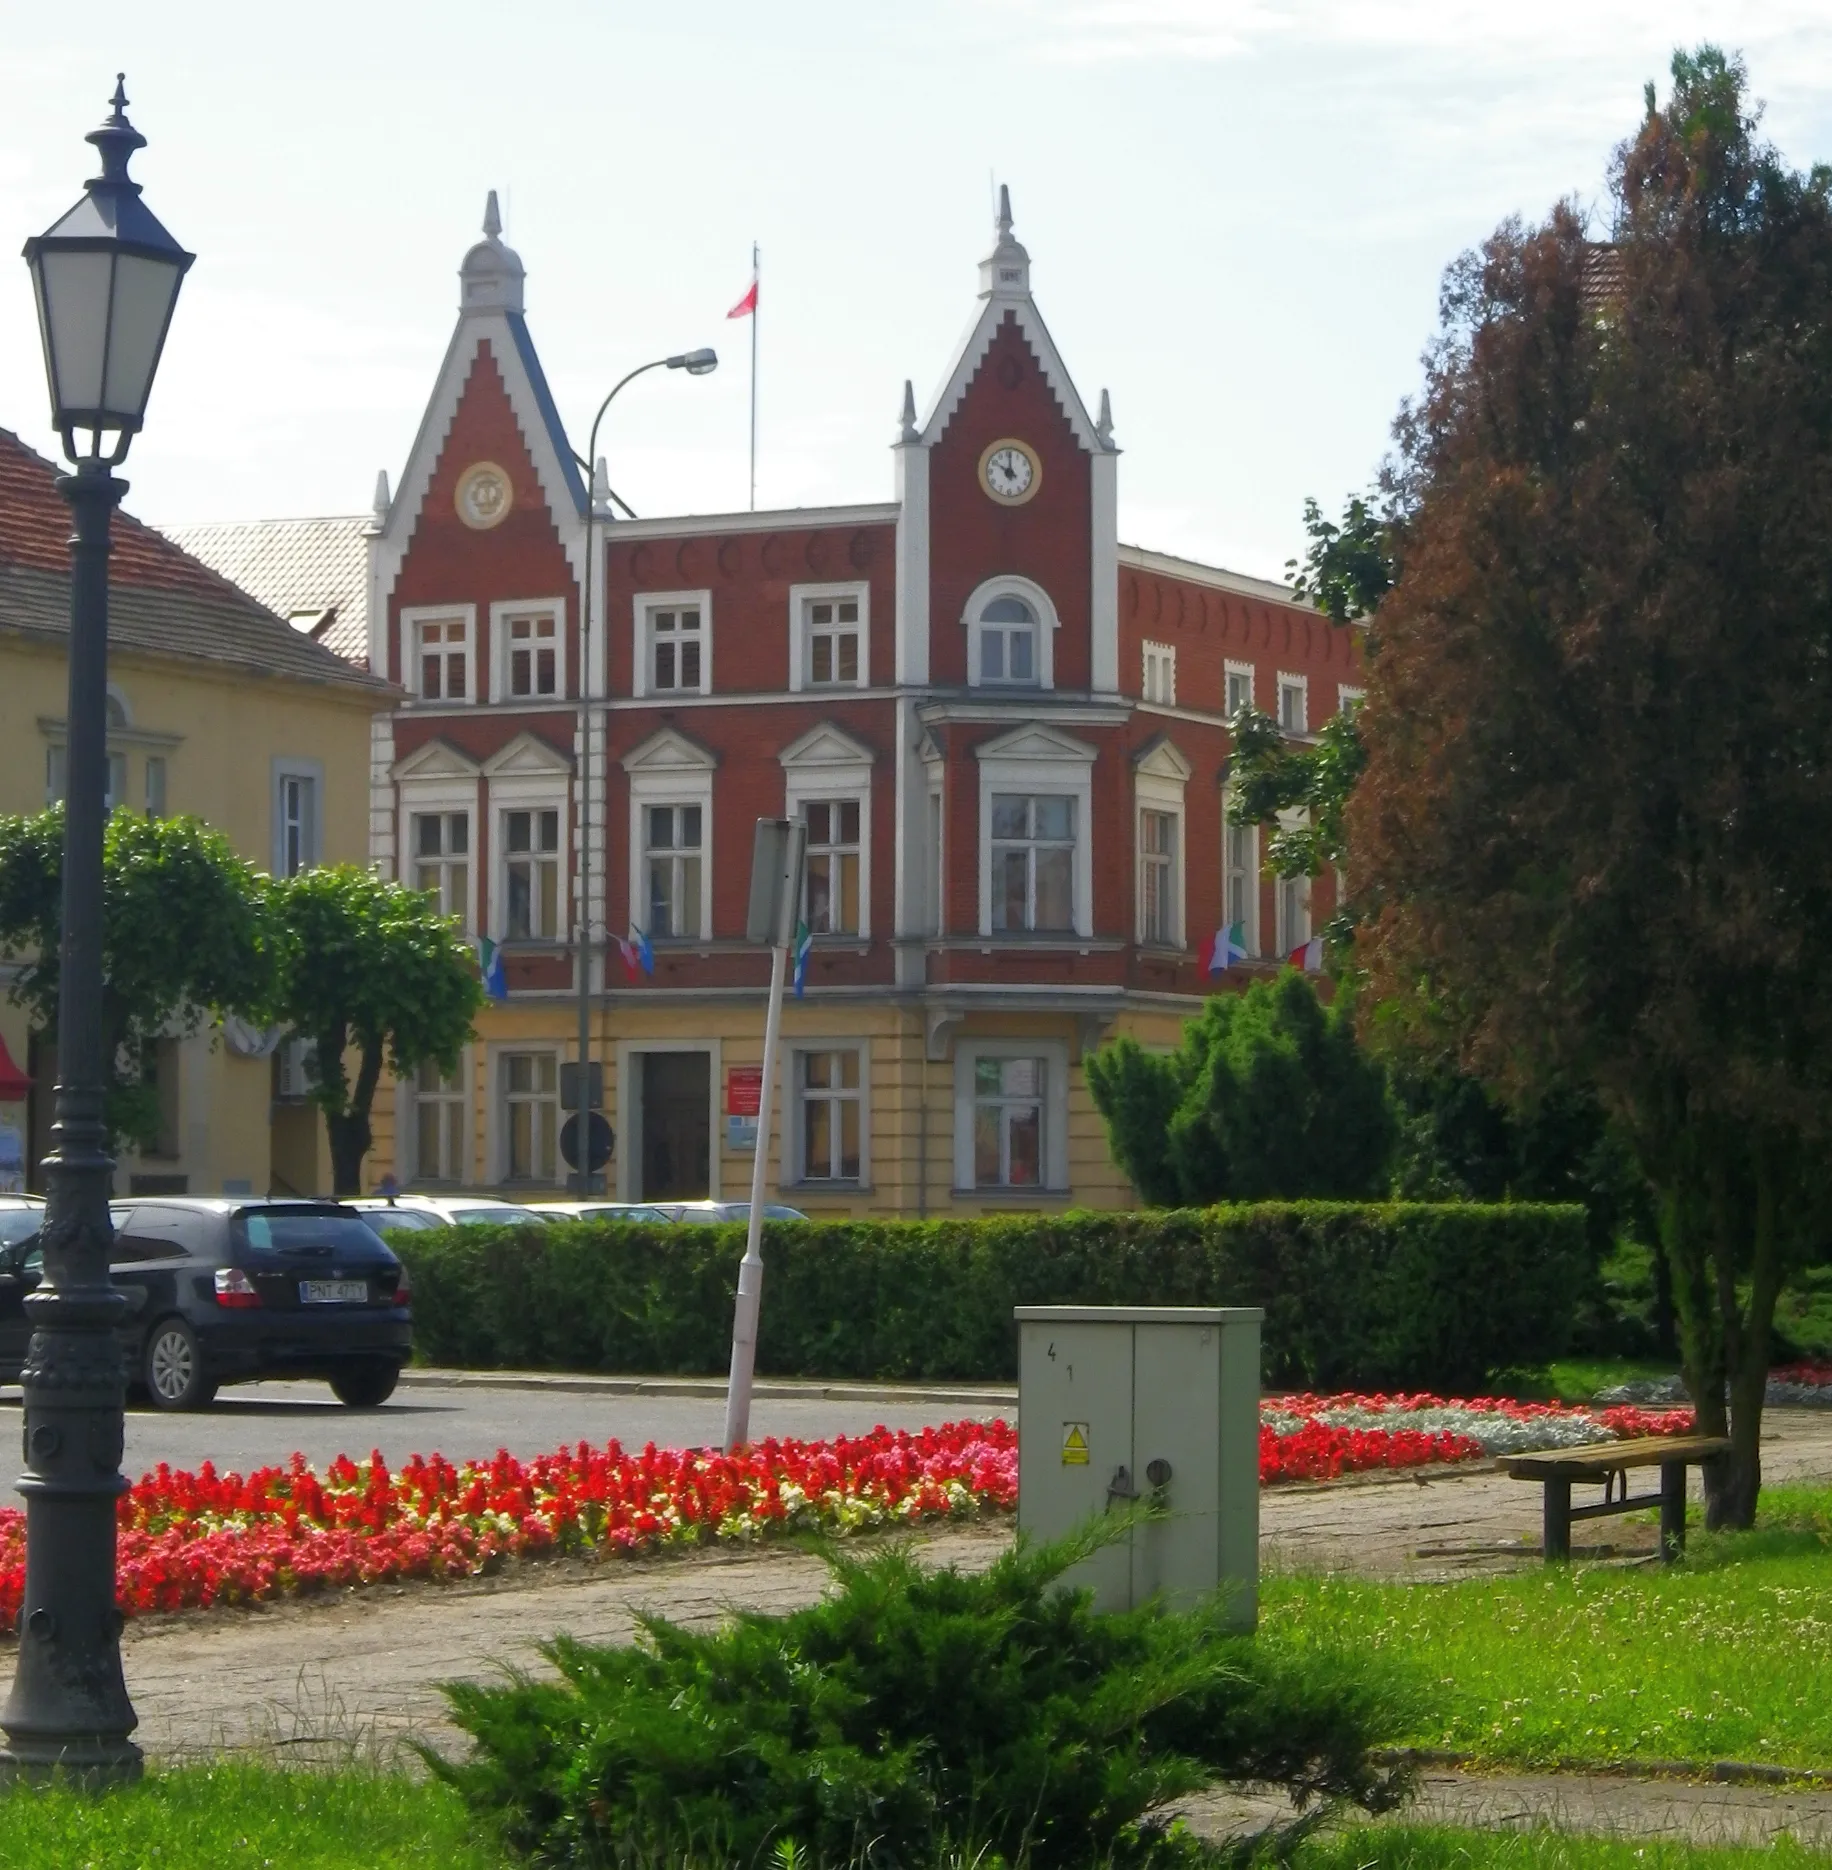 Photo showing: Town Hall in Buk (Poland, Greater Poland Voivodeship), build in 1897, viewed from NW direction. In the corner visible also Plac Przemysława 24 residential building, cultural heritage monument